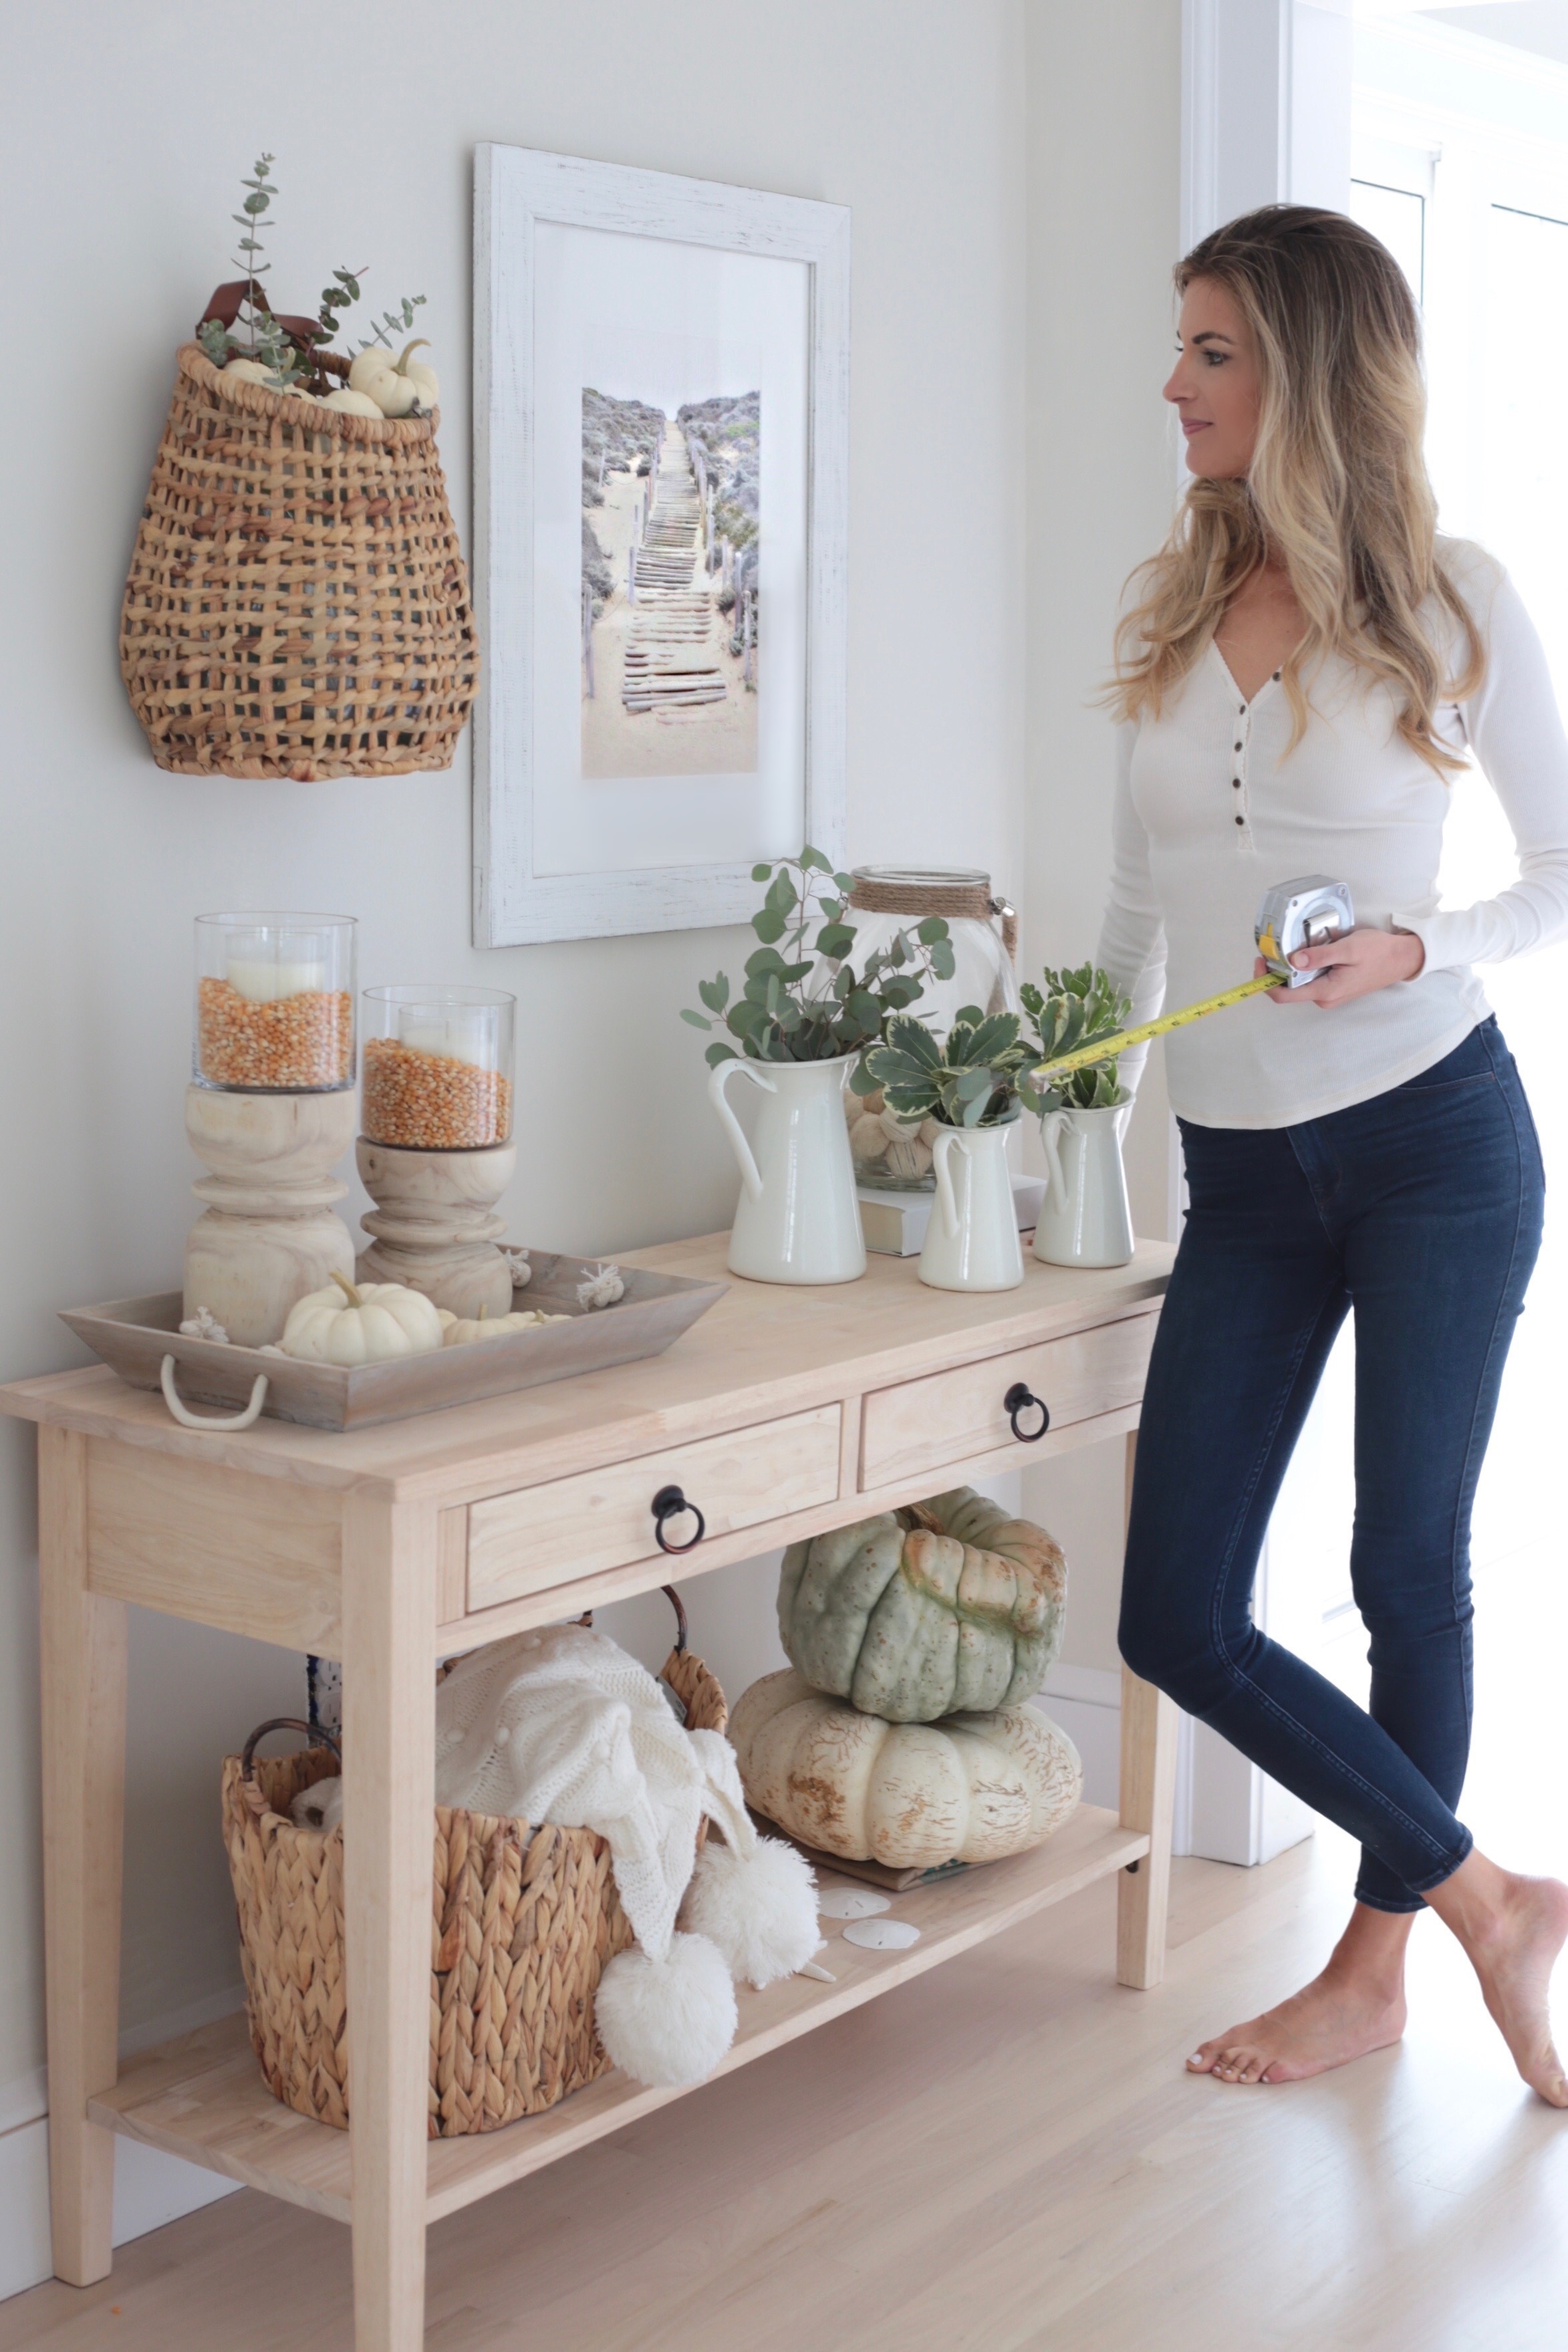  tips for picking art for your your home - coastal art from minted over console table decorated for Fall on pinteresting plans lifestyle blog